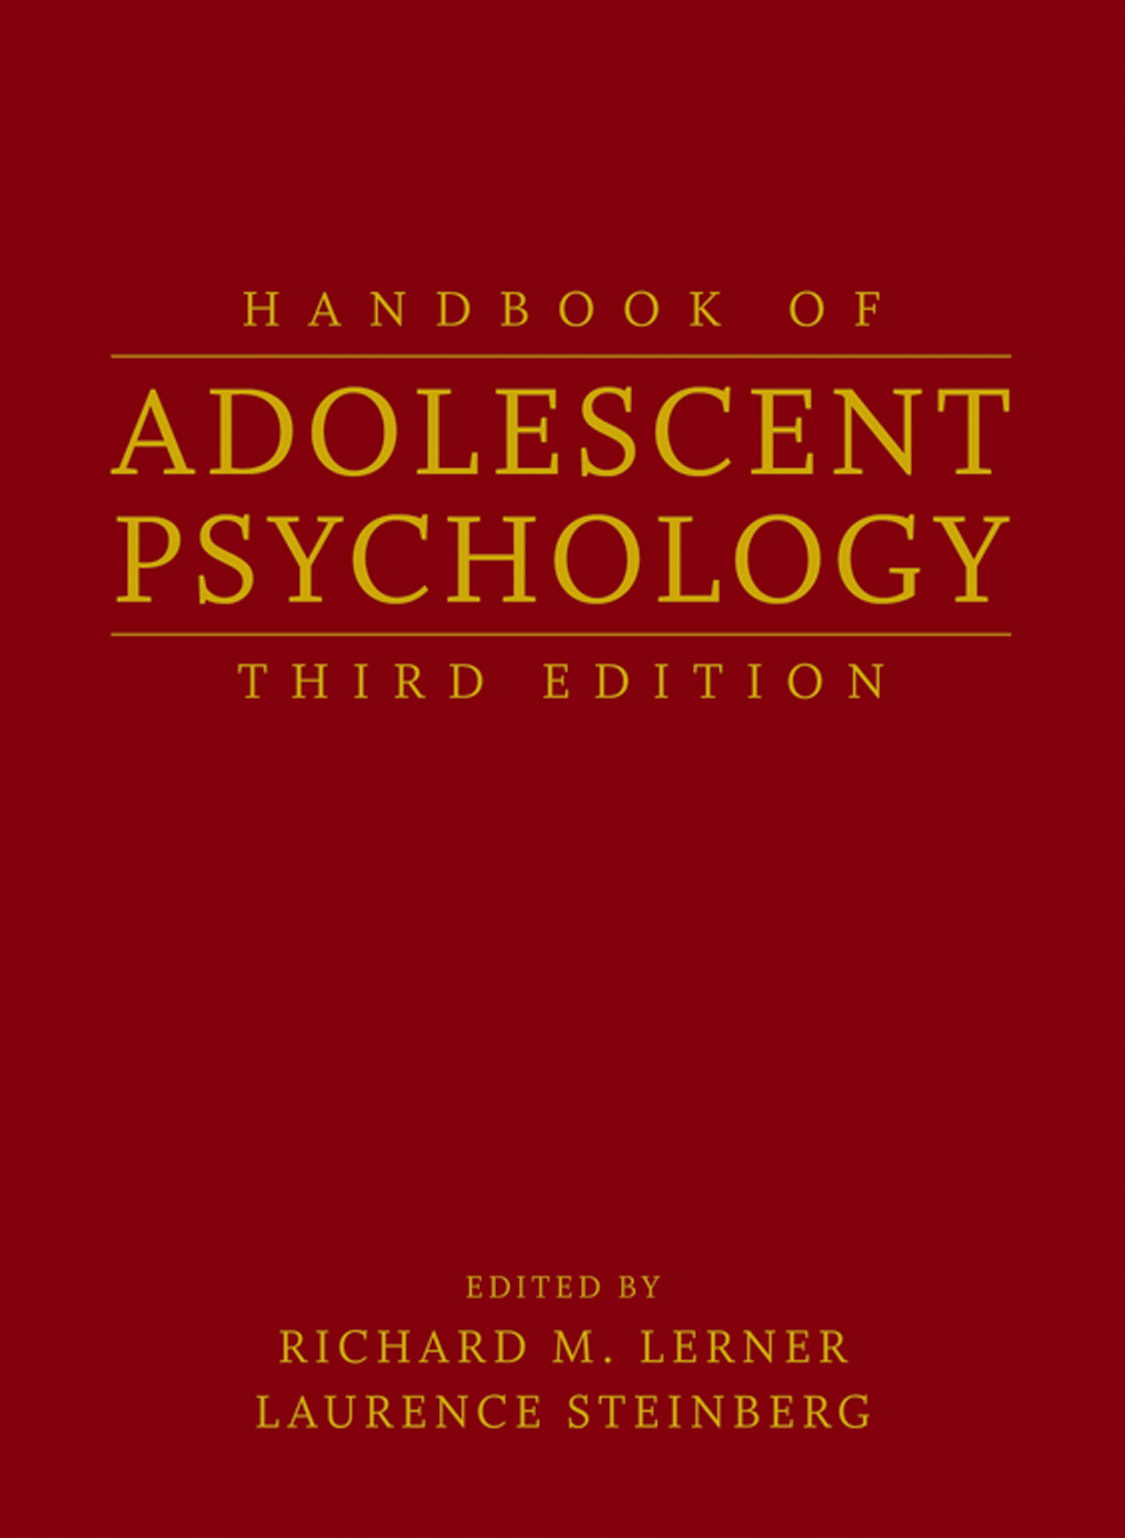 Religion and spirituality in adolescent development - Chapter in book - 2009